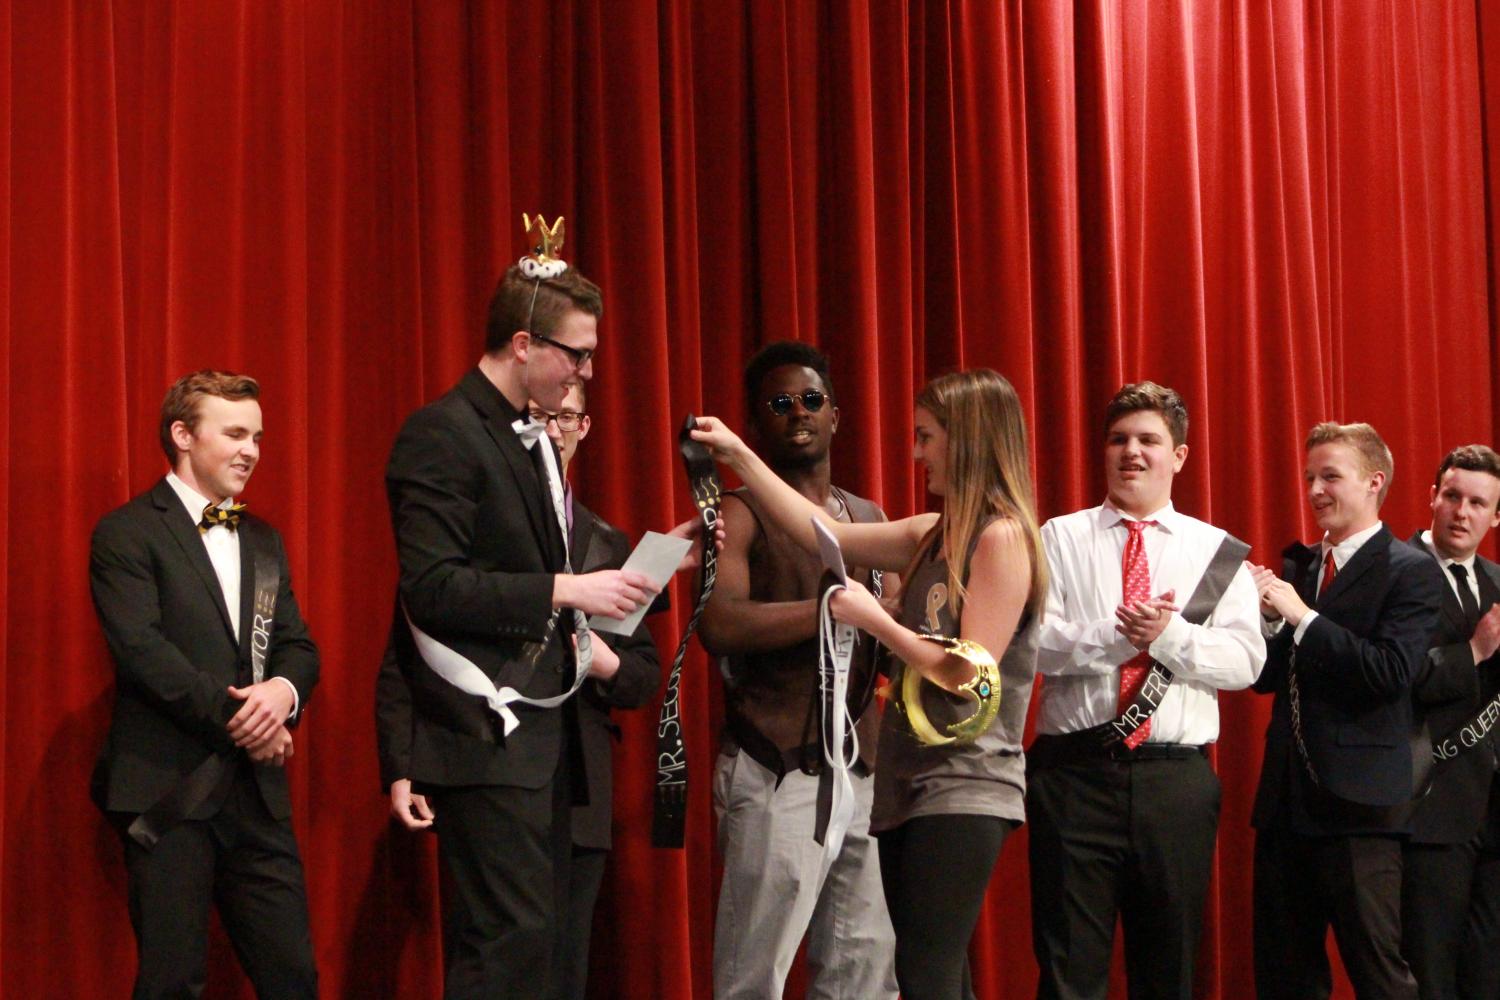 Junior Aaliyeh Habibi crowns senior Sean Rhomberg with second runner up and Mr. Congeniality. Rhomberg came in third place, while Zac Cary came in second place and Bryce Perry took first place. Each place was awarded a set amount of money, a sash and crown that they got to wear. 